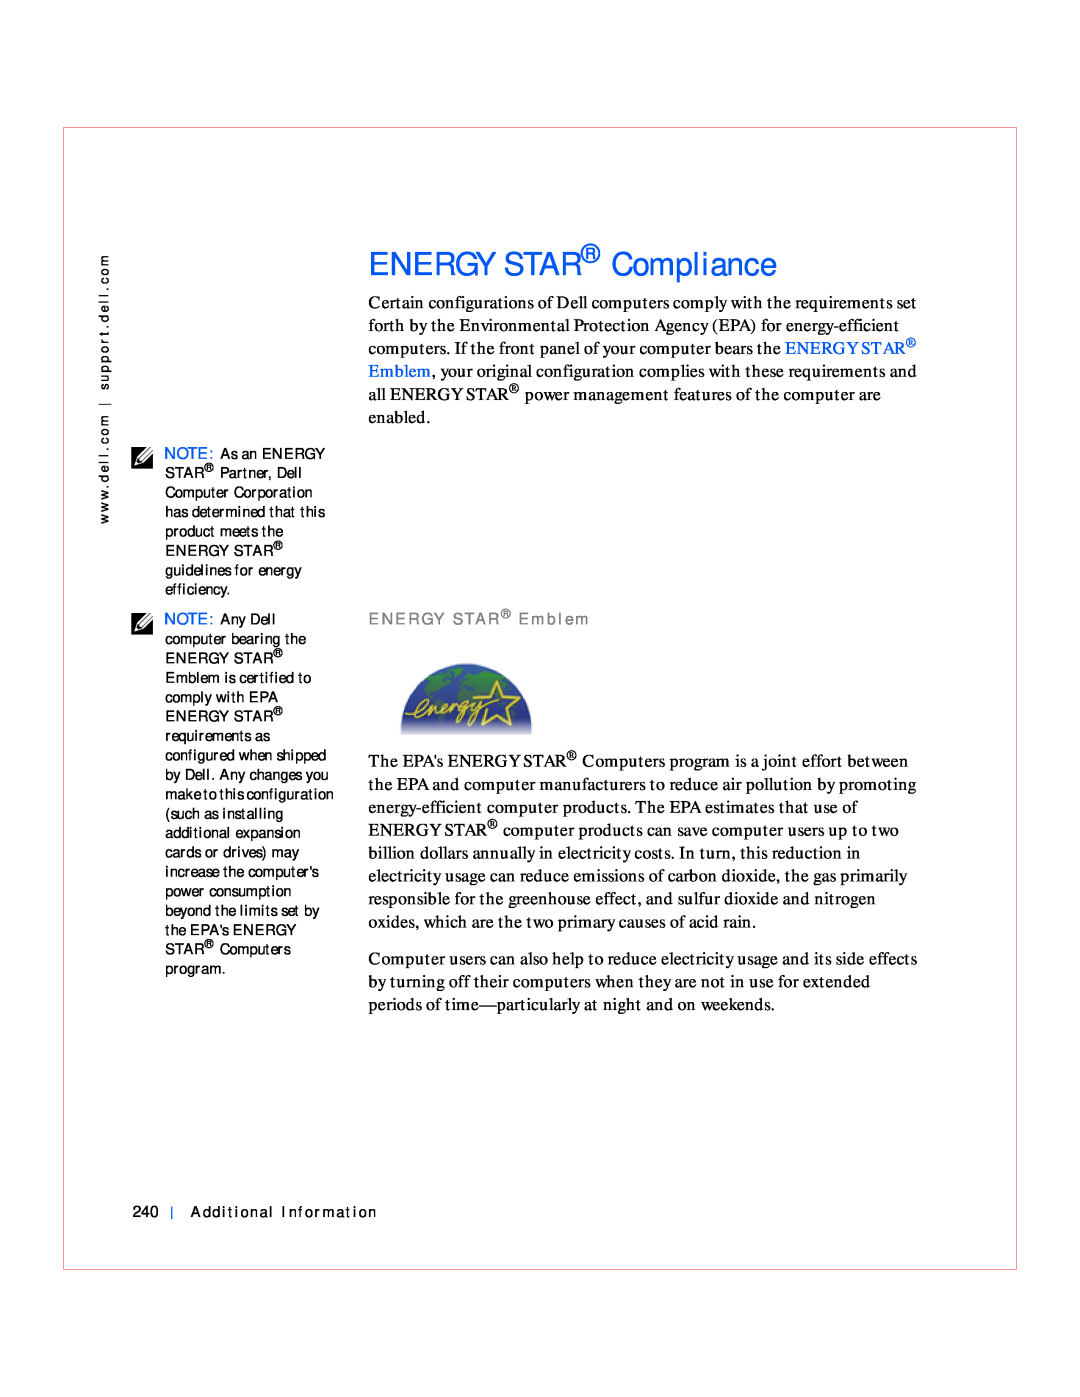 Dell GX240 manual ENERGY STAR Compliance, ENERGY STAR guidelines for energy efficiency, Additional Information 